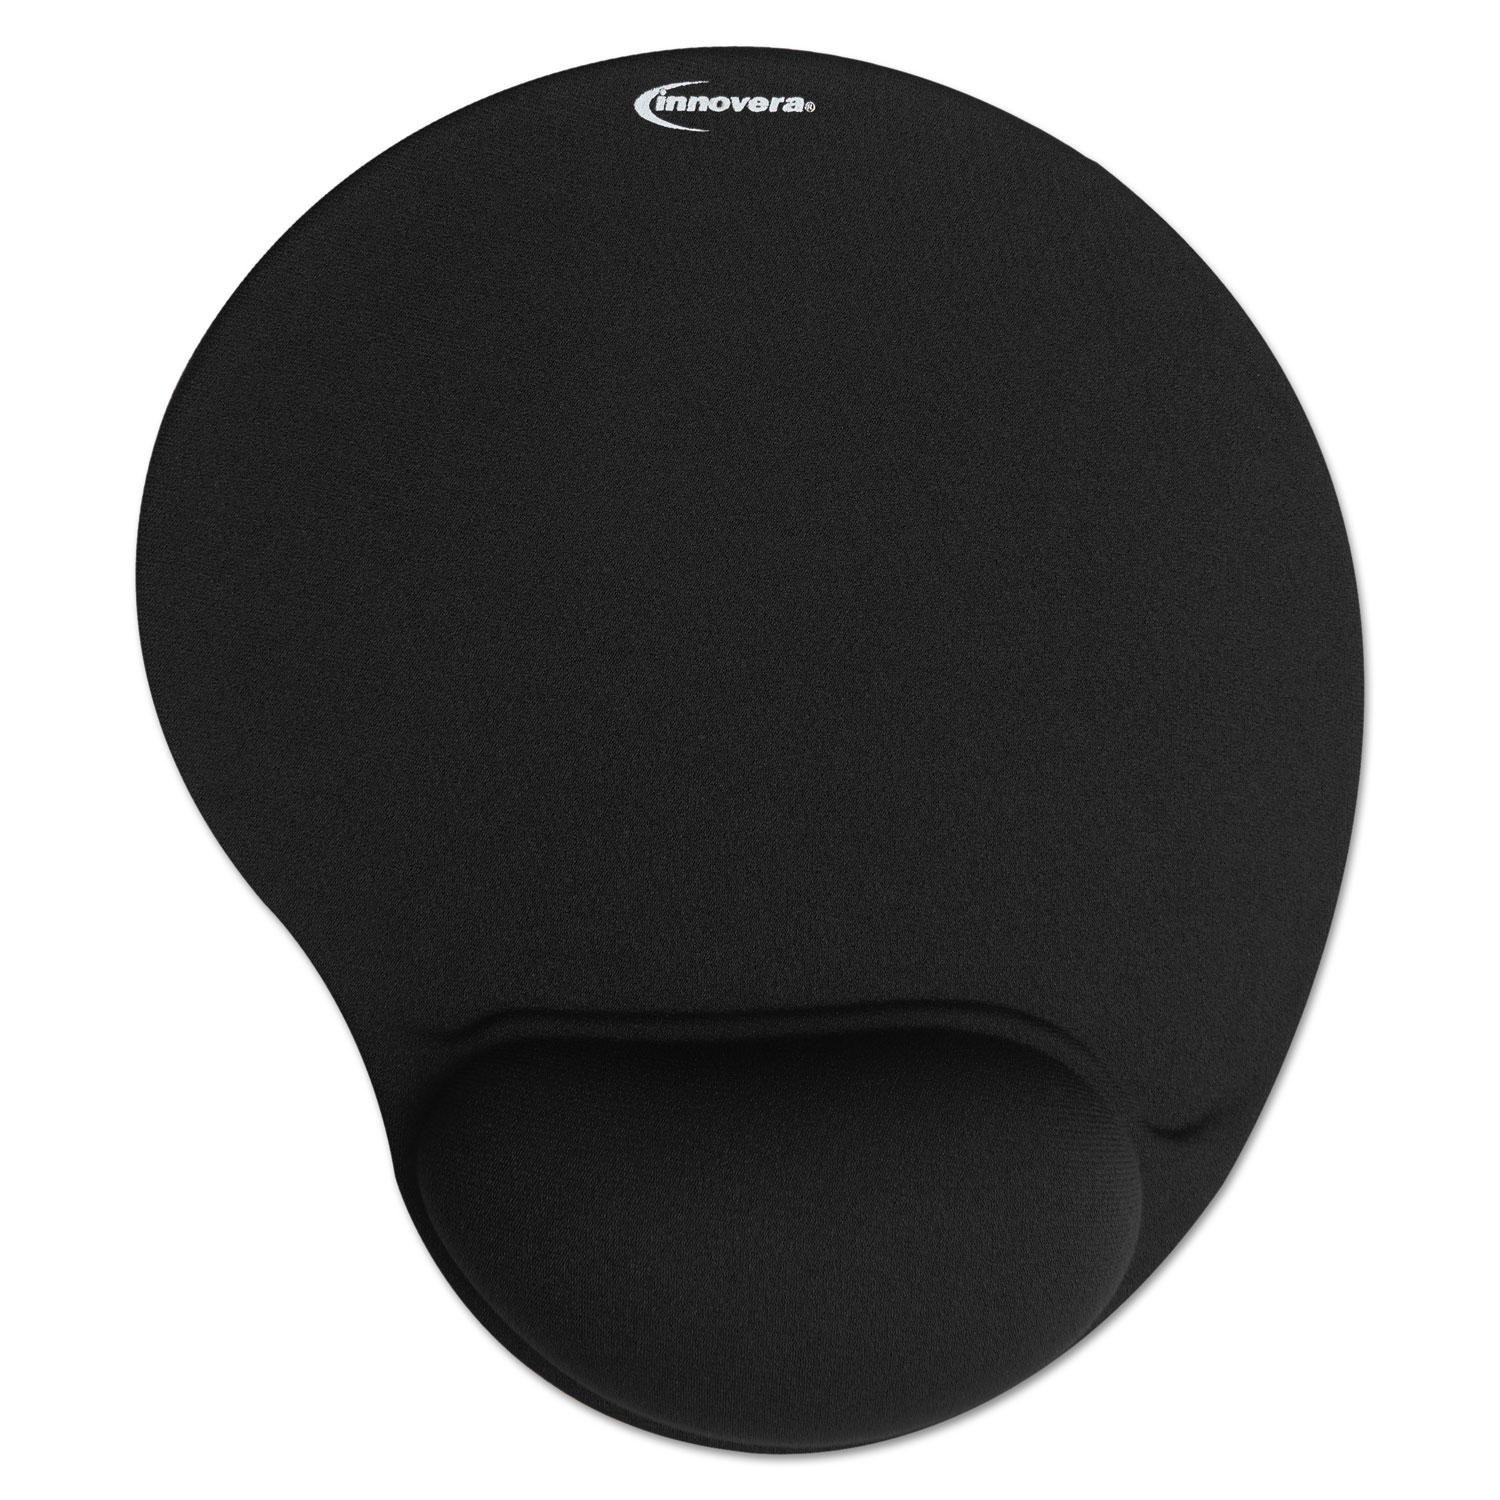 Mouse Pad with Gel Wrist Rest, 8.25 x 9.62, Blue